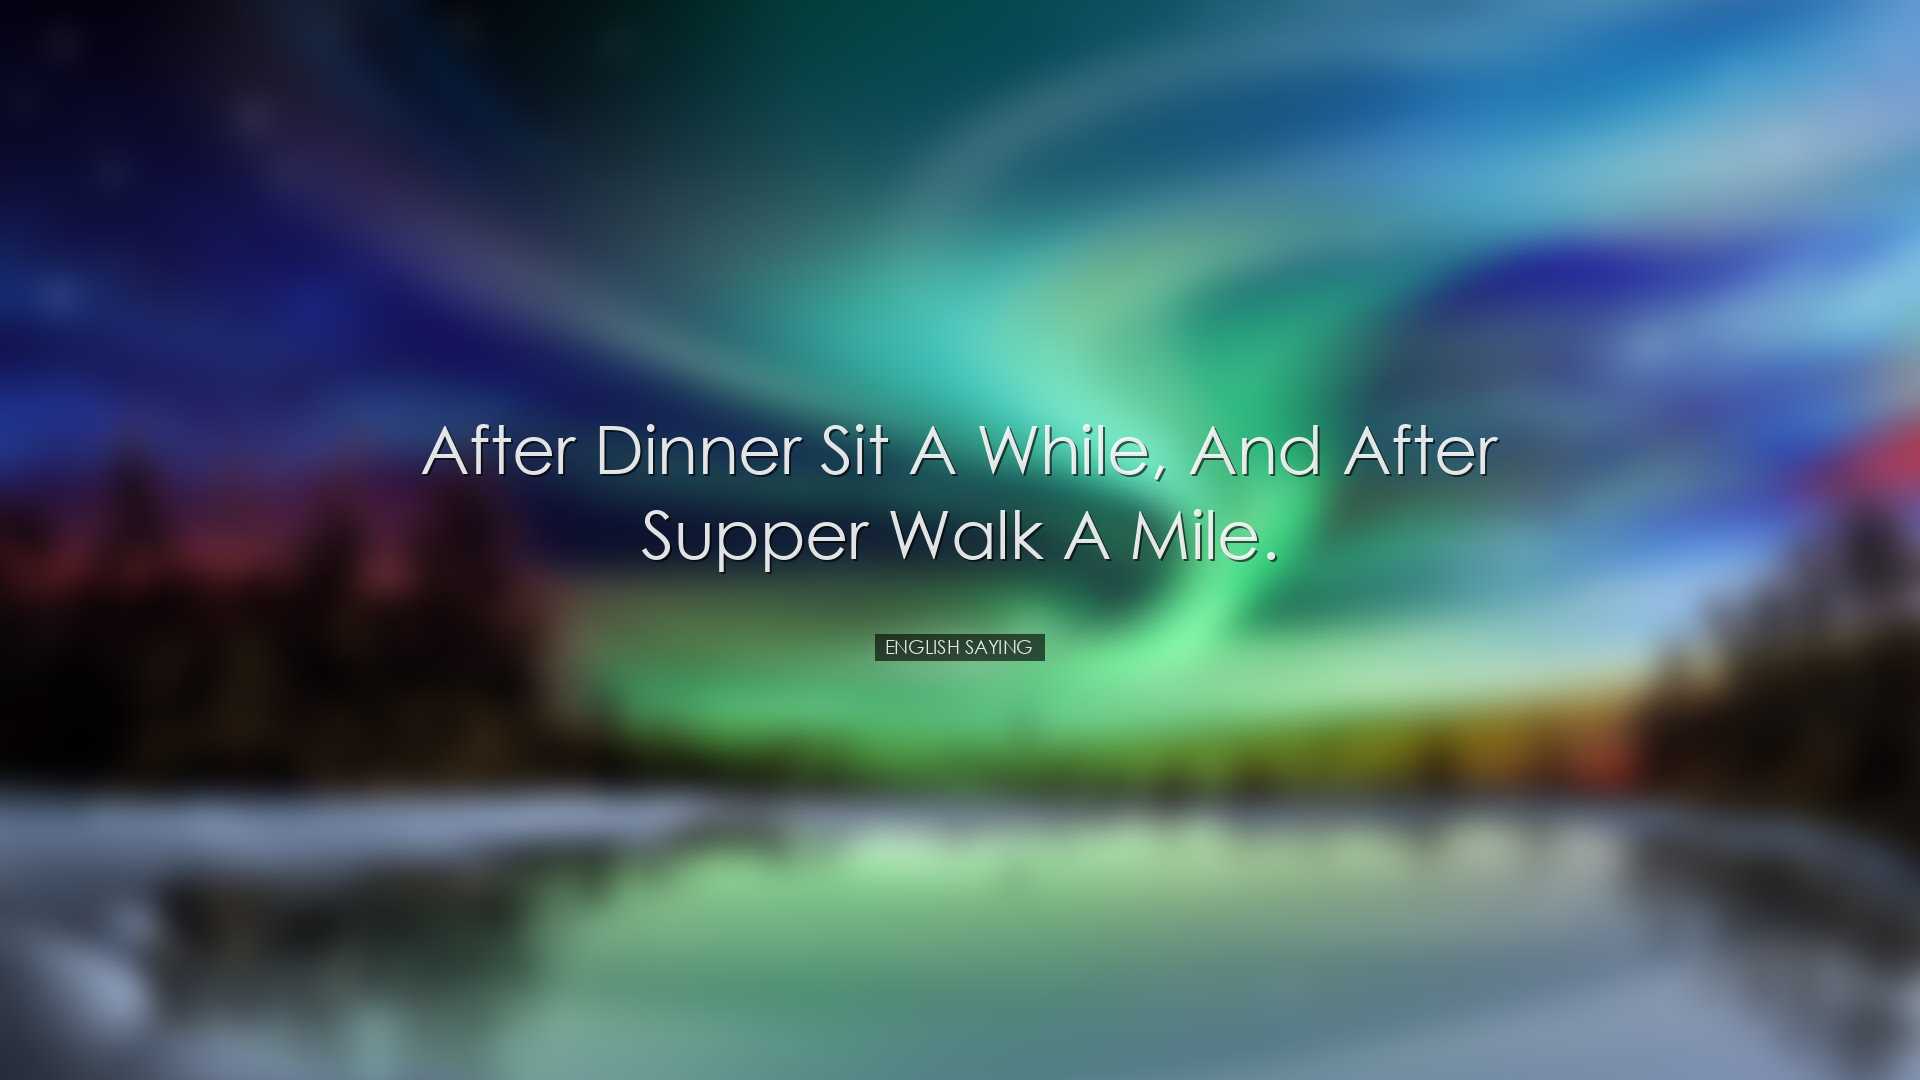 After dinner sit a while, and after supper walk a mile. - English